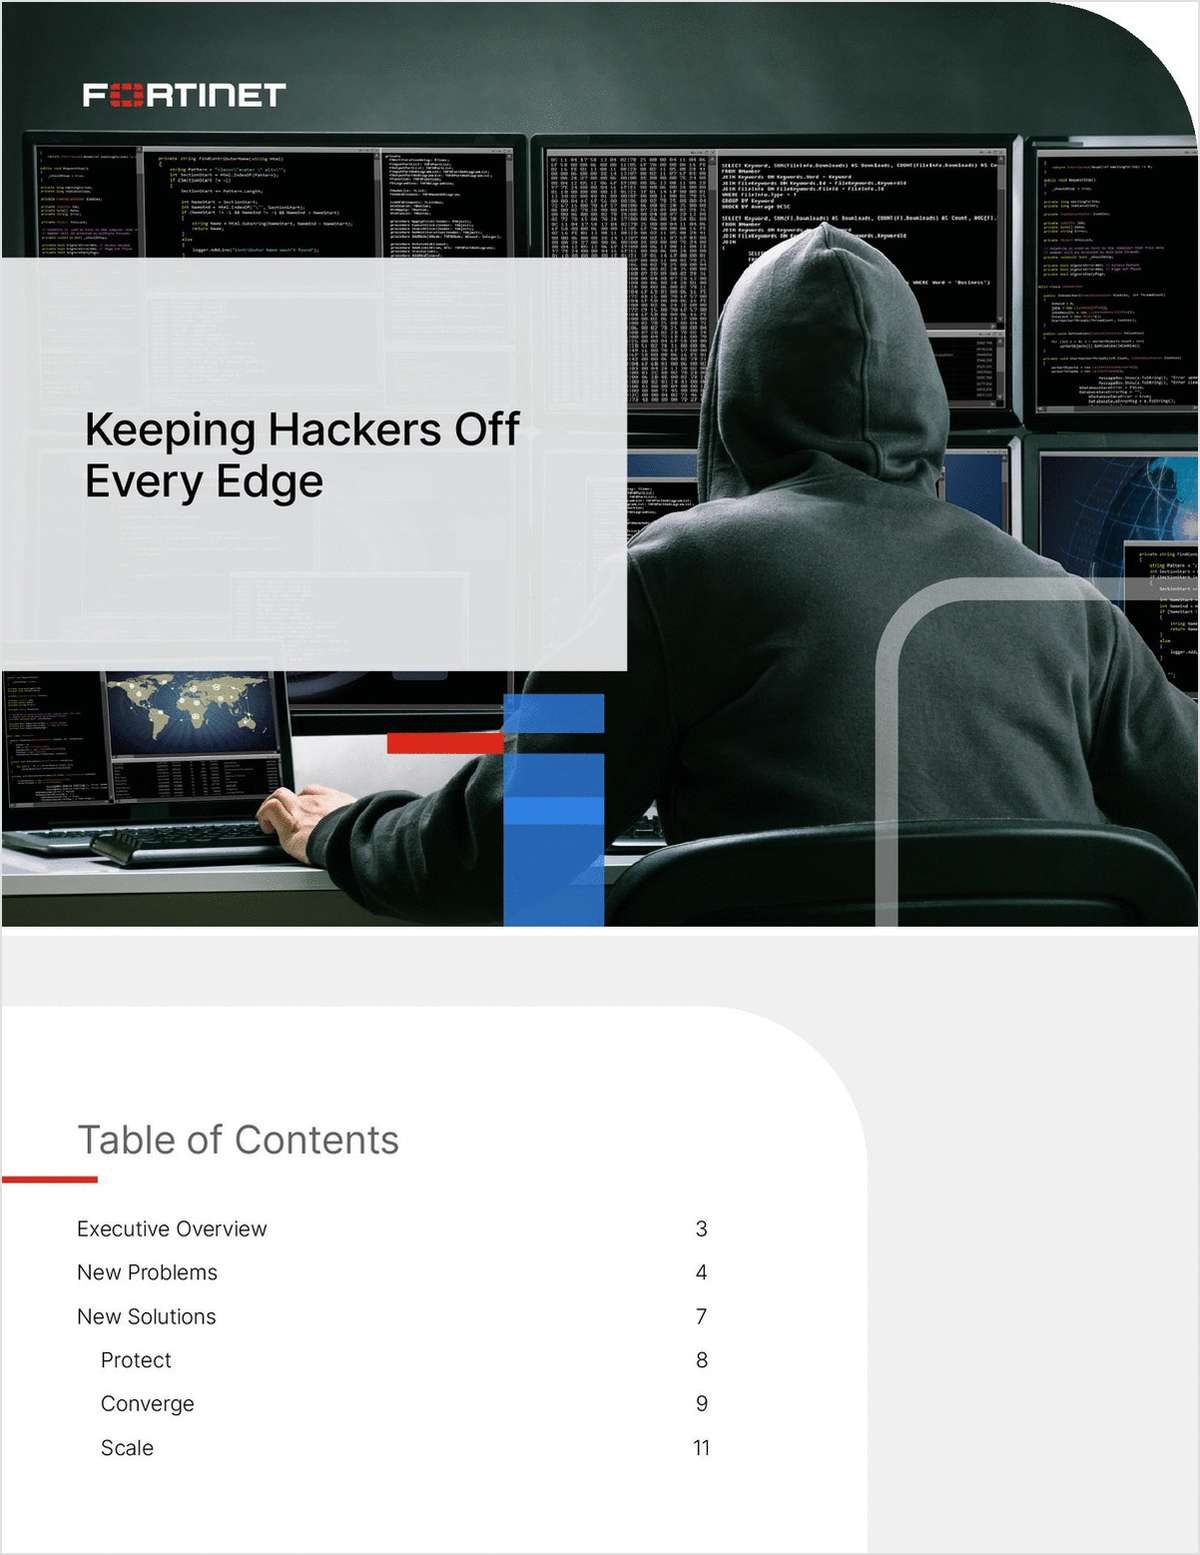 Keeping Hackers Off Every Edge